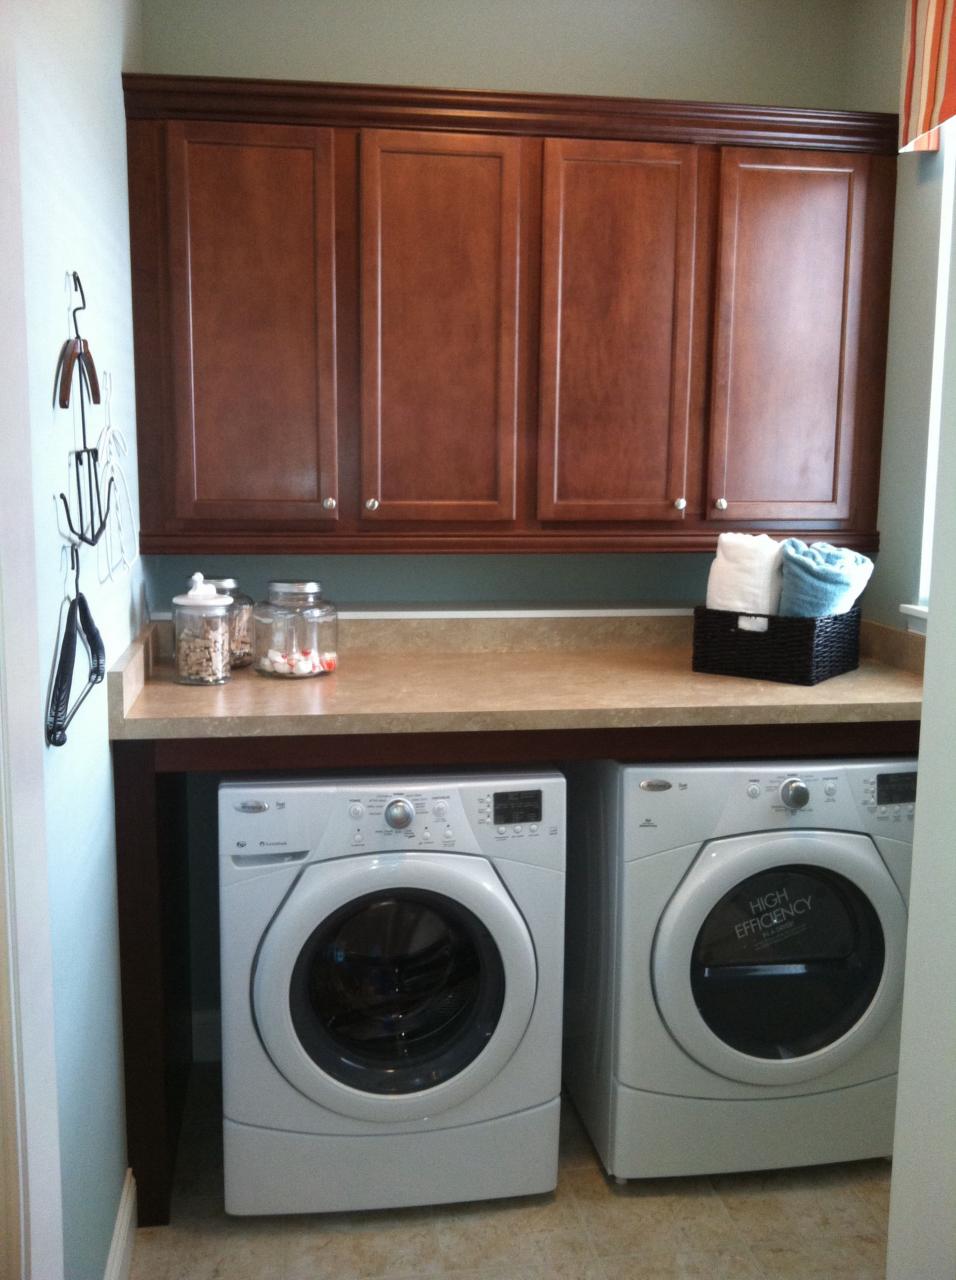 Love the shelf over the washer and dryer, must be on the 2nd floor